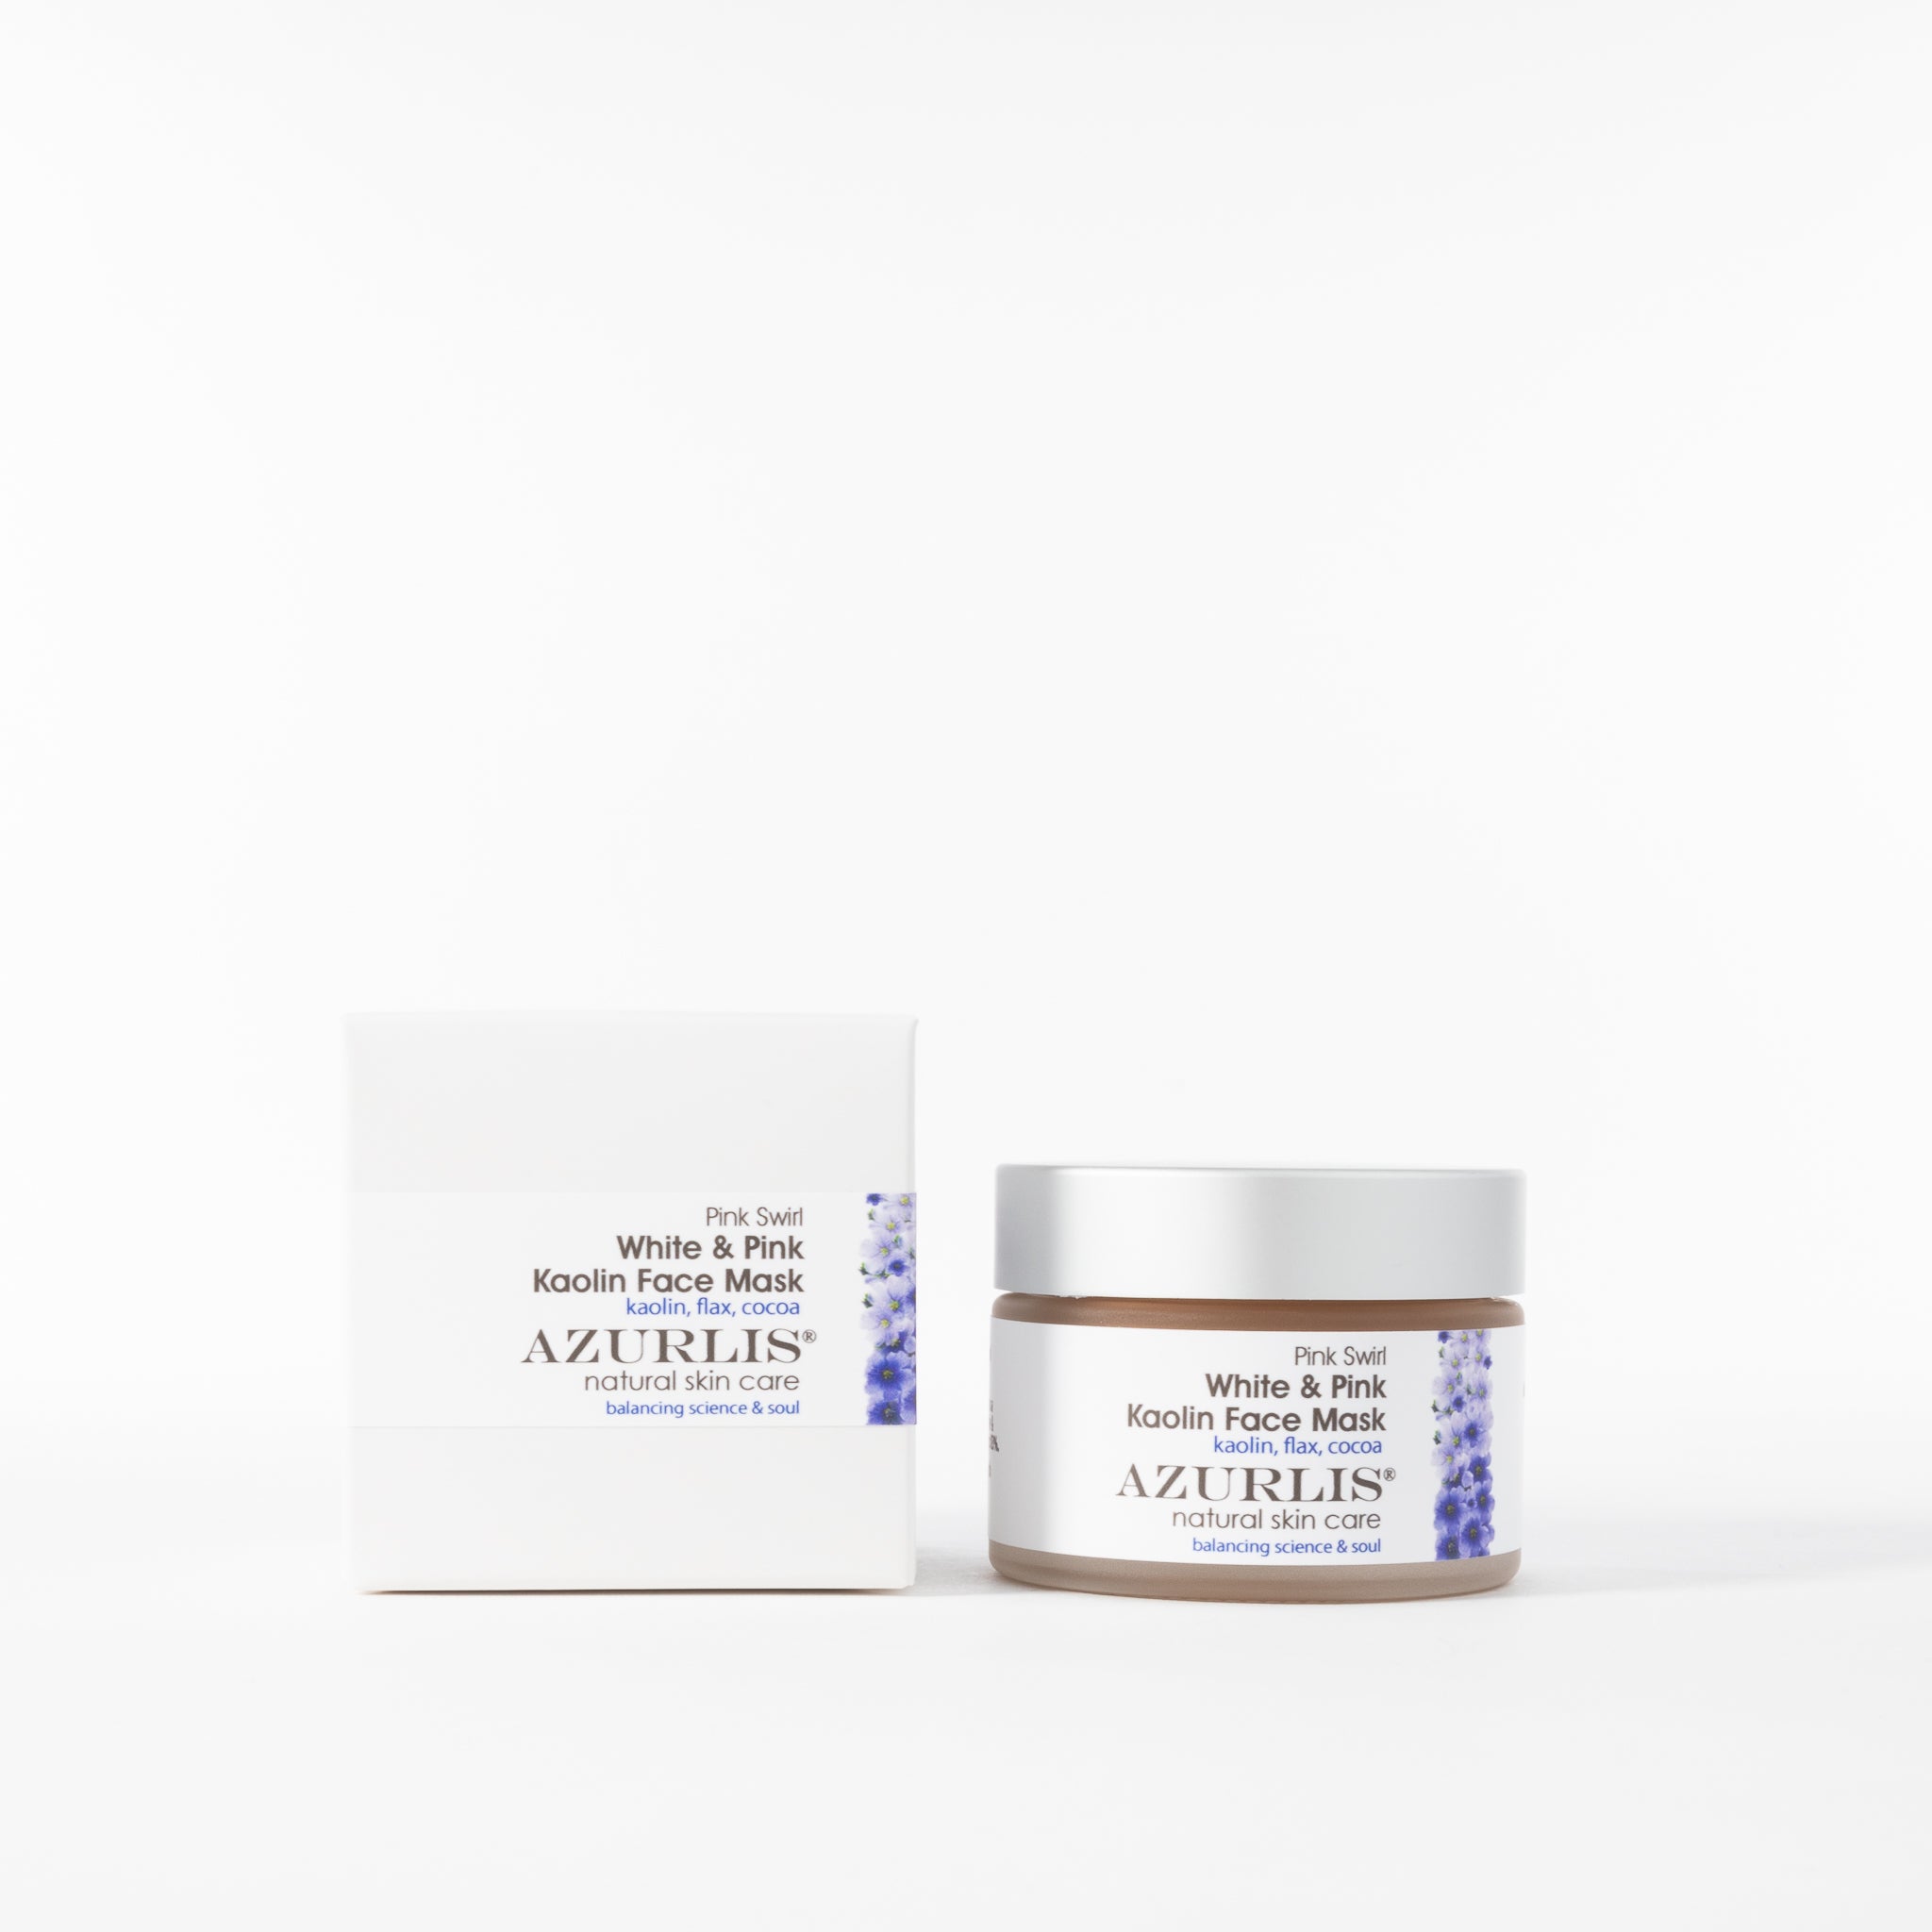 Azurlis™ Pink Swirl Kaolin Face Mask 50/30ml is a &quot;wet mask&quot;, as it will not dry up on your skin, but provides a source of deep nourishing and balancing ingredients. Ideal for all types of skin, whether sensitive, fragile skin, or acne prone.